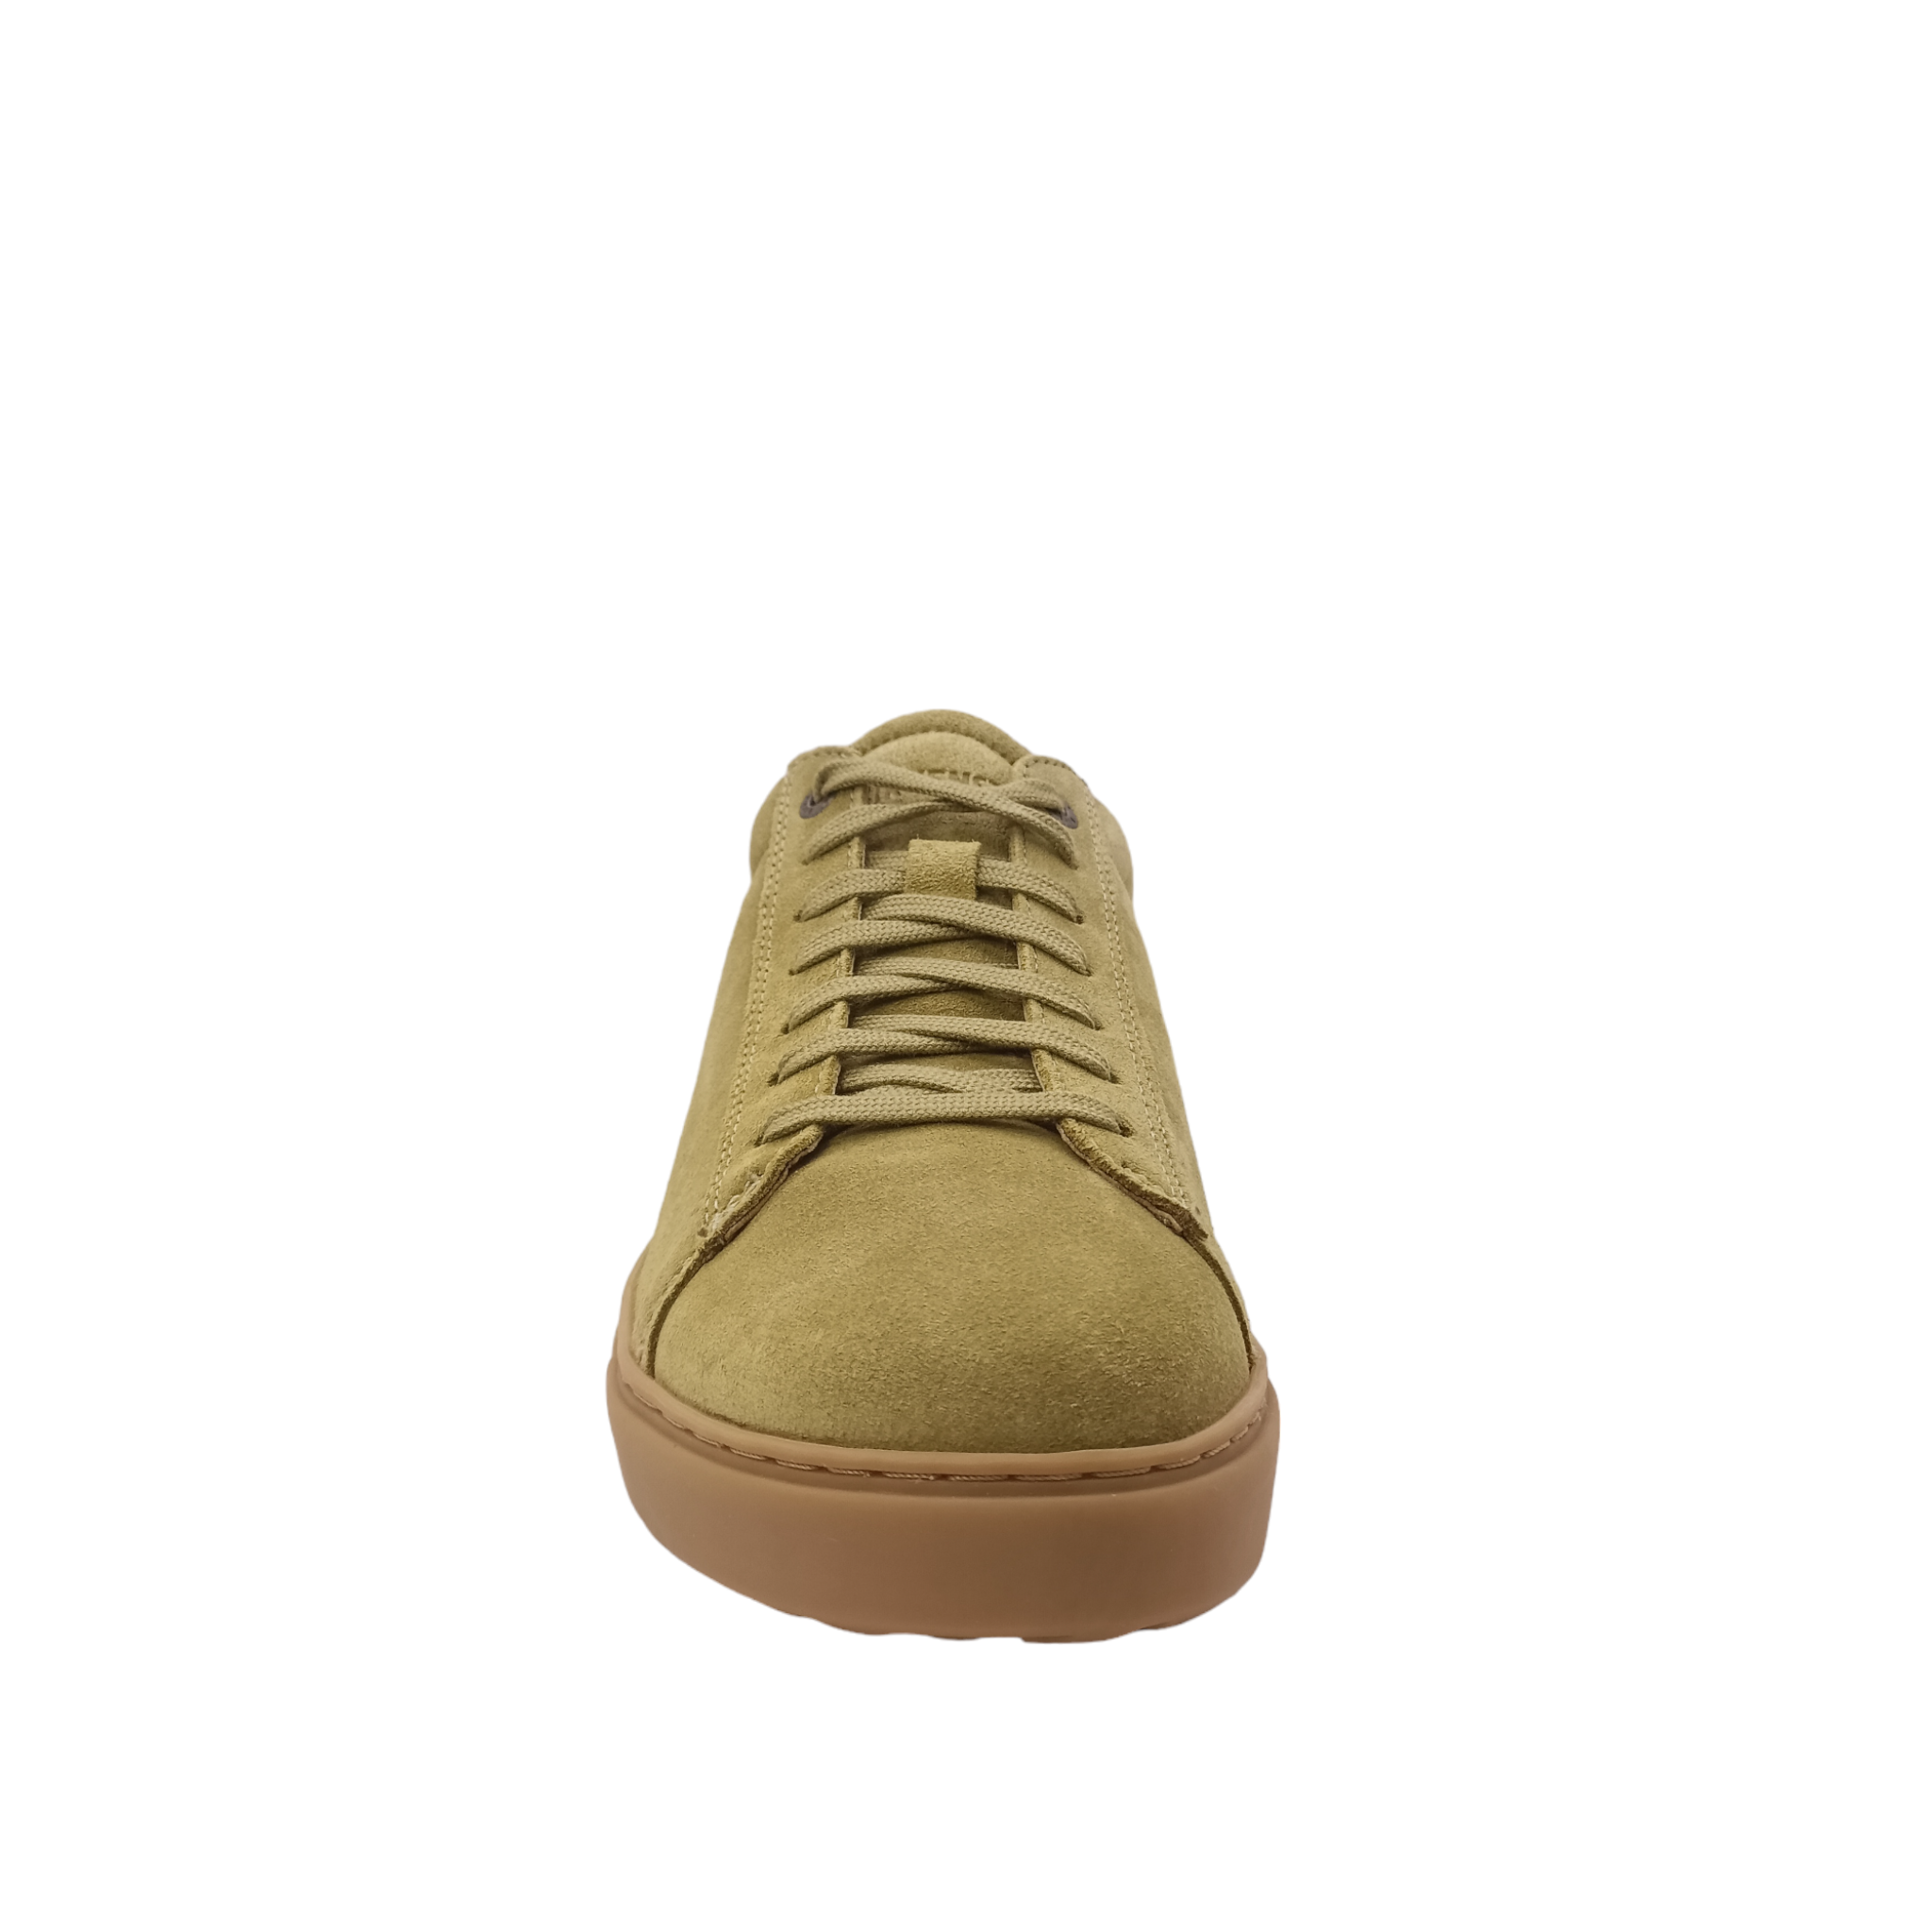 Shop Women&#39;s Birkenstock shoes. front view of Khaki Suede Sneaker with tan coloured sole with a small cork line around the heel. Green Laces with a padded heel. Shop Birkenstock Shoes Online and In-store with shoe&amp;me Mount Maunganui NZ